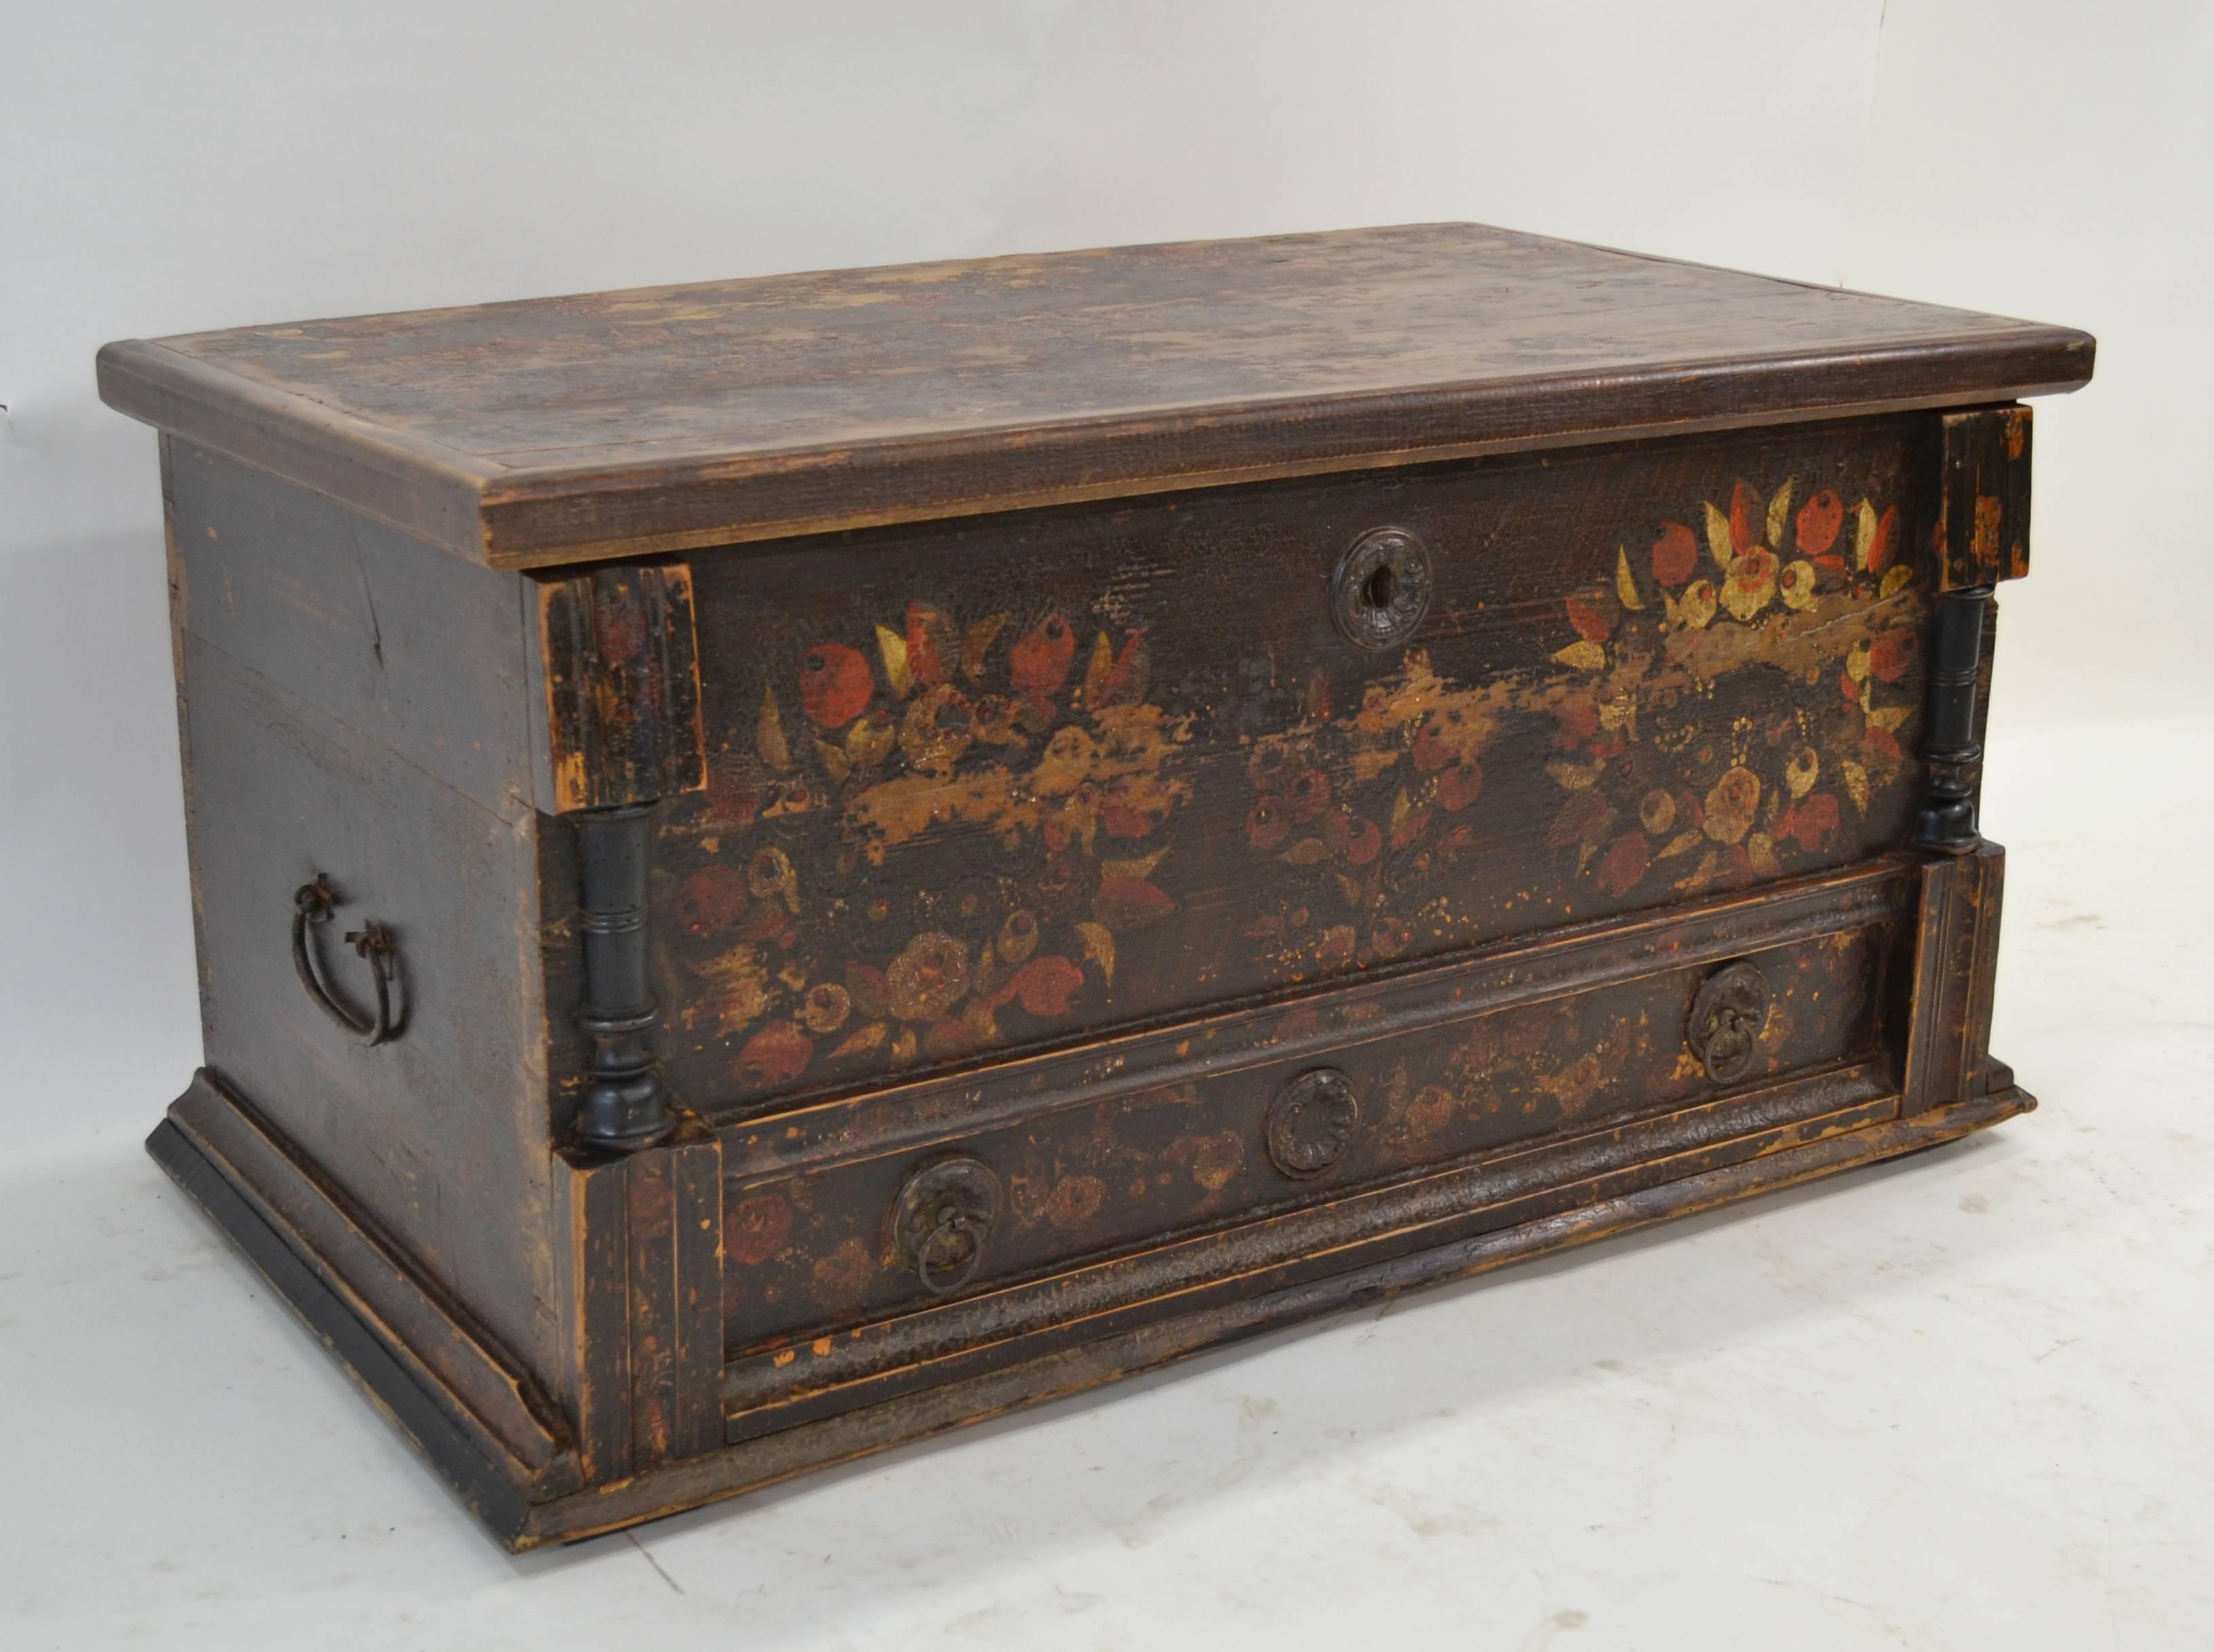 This painted faux mule chest, in the Baroque style, looks a little dark and gloomy at first sight but, caught in a favorable light, the more you look at it the more you see. The ground is a stylized grain paint in rich dark and light brown. Above